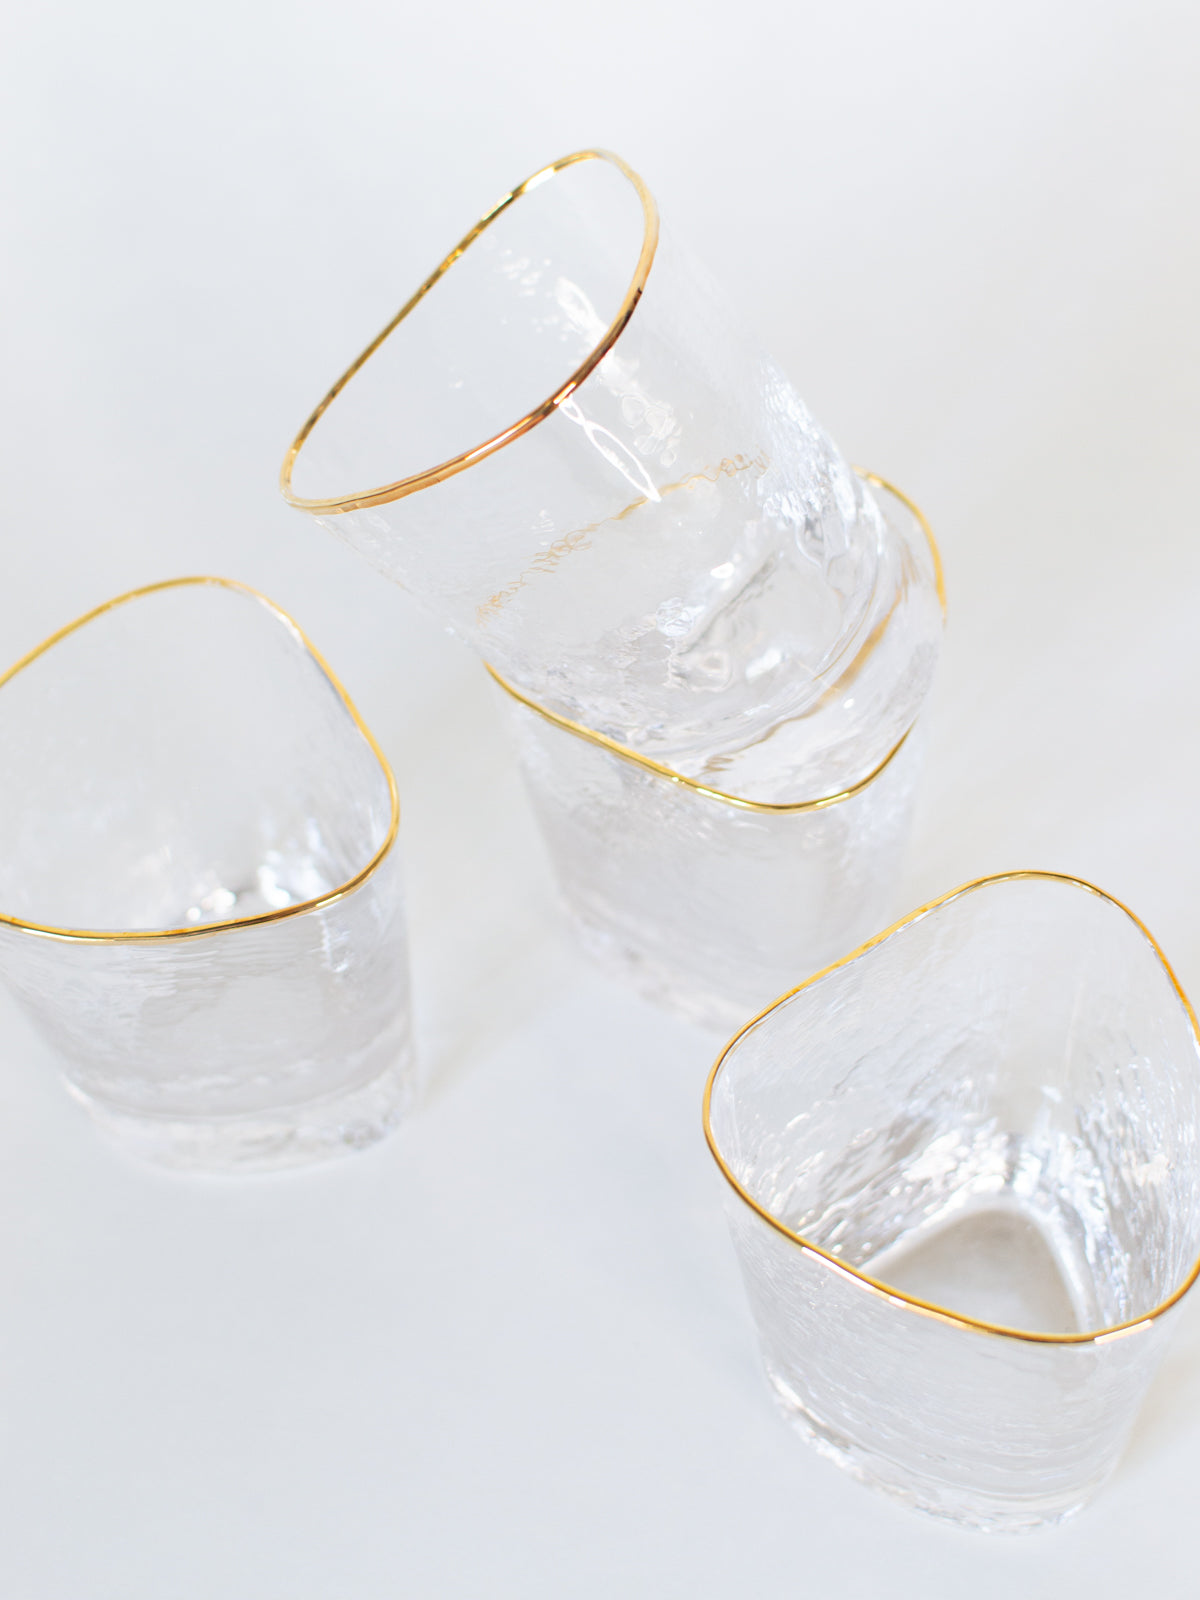 Triangular Gold Rimmed Double Old Fashioned Glass, Set of 4